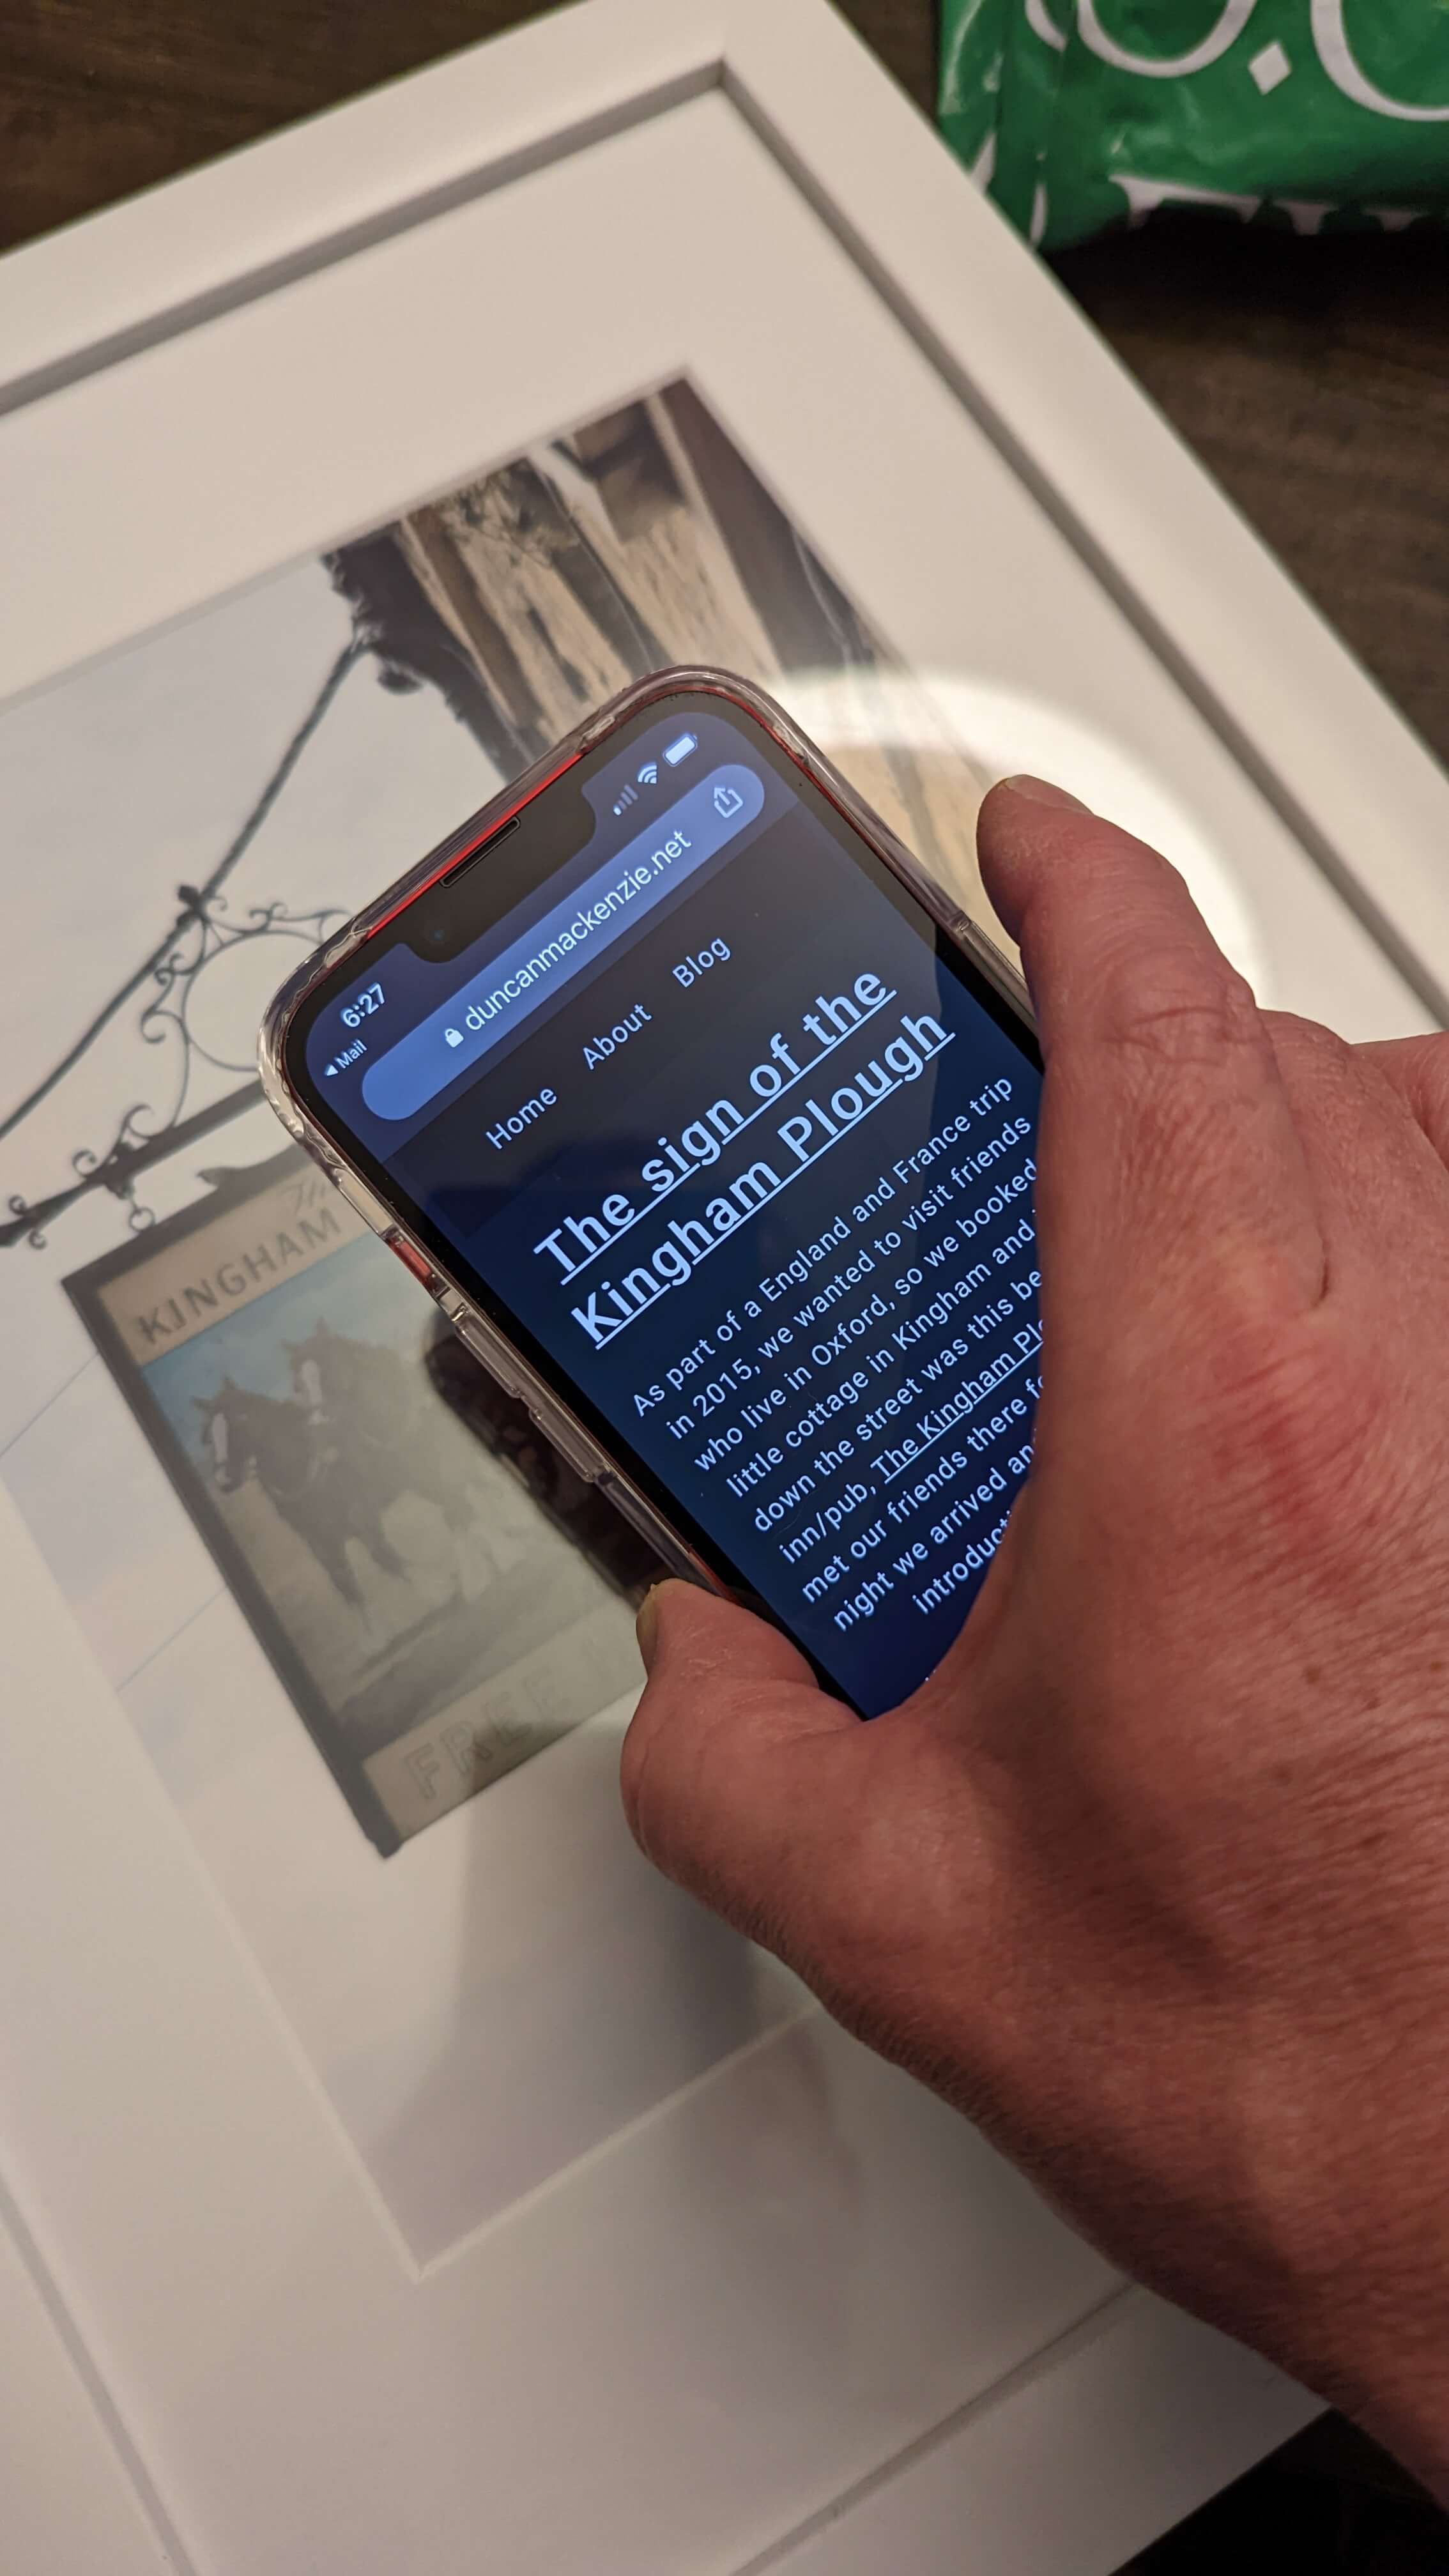 shot of an iOS phone held near the picture frame, photo info page visible on the device